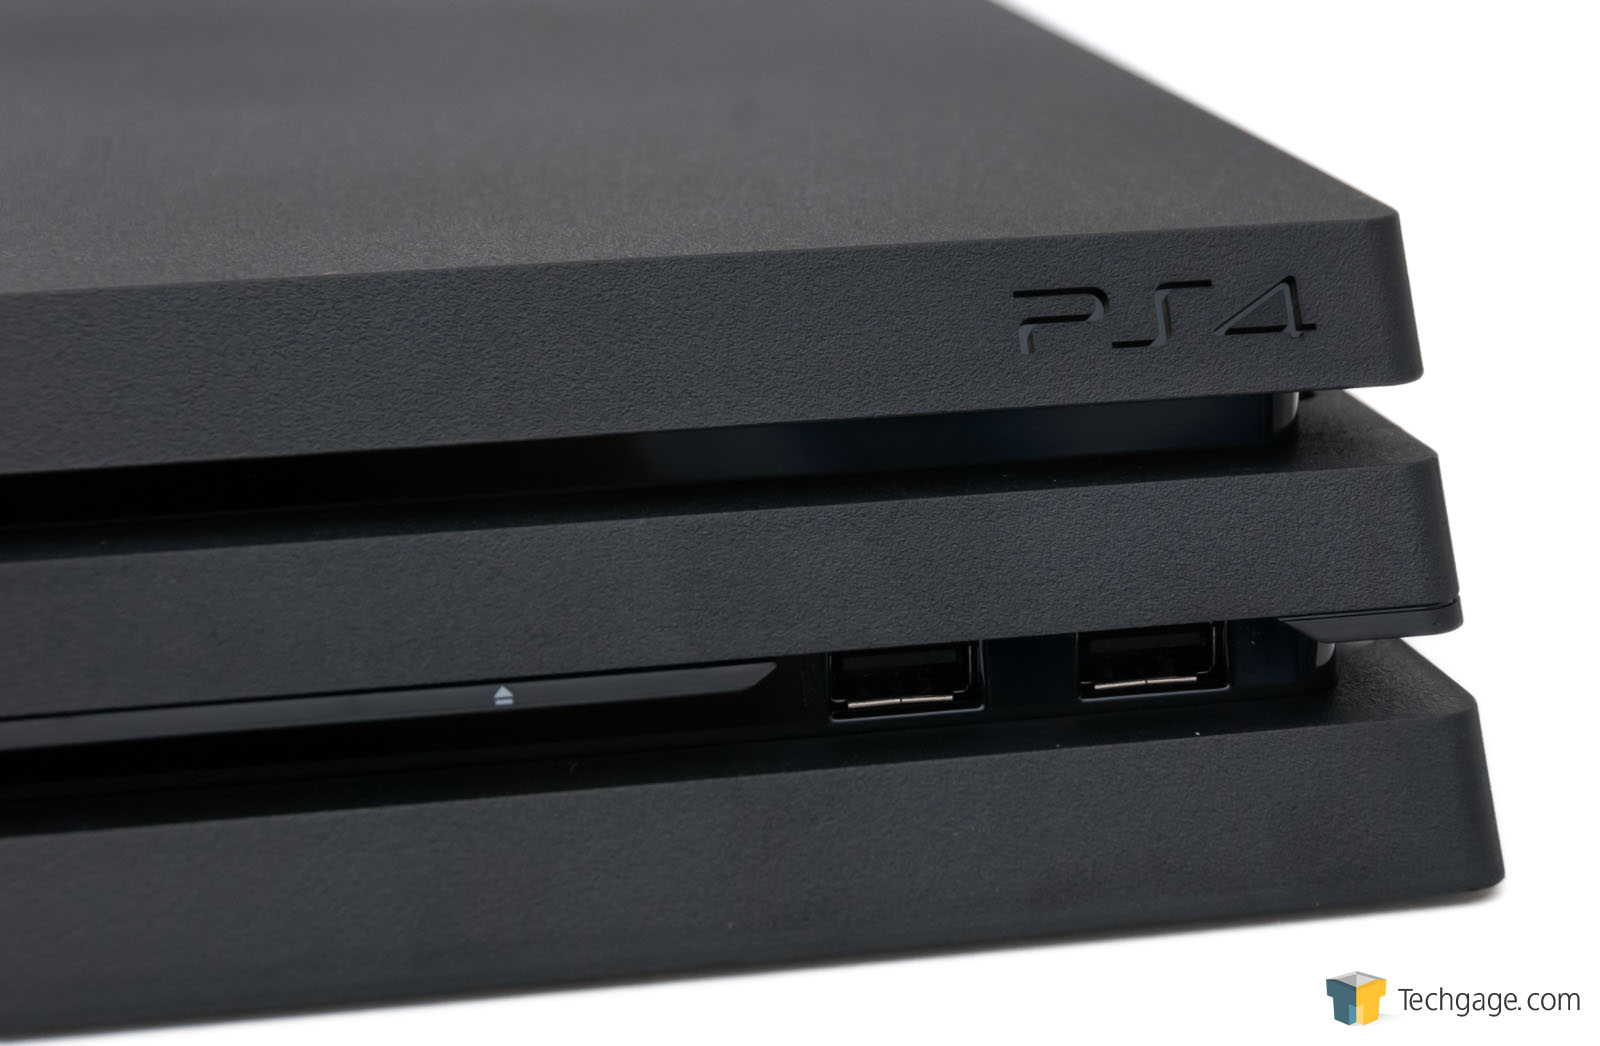 PlayStation 4 Pro Review: Is This “4K” Machine Worth An Upgrade? – Techgage